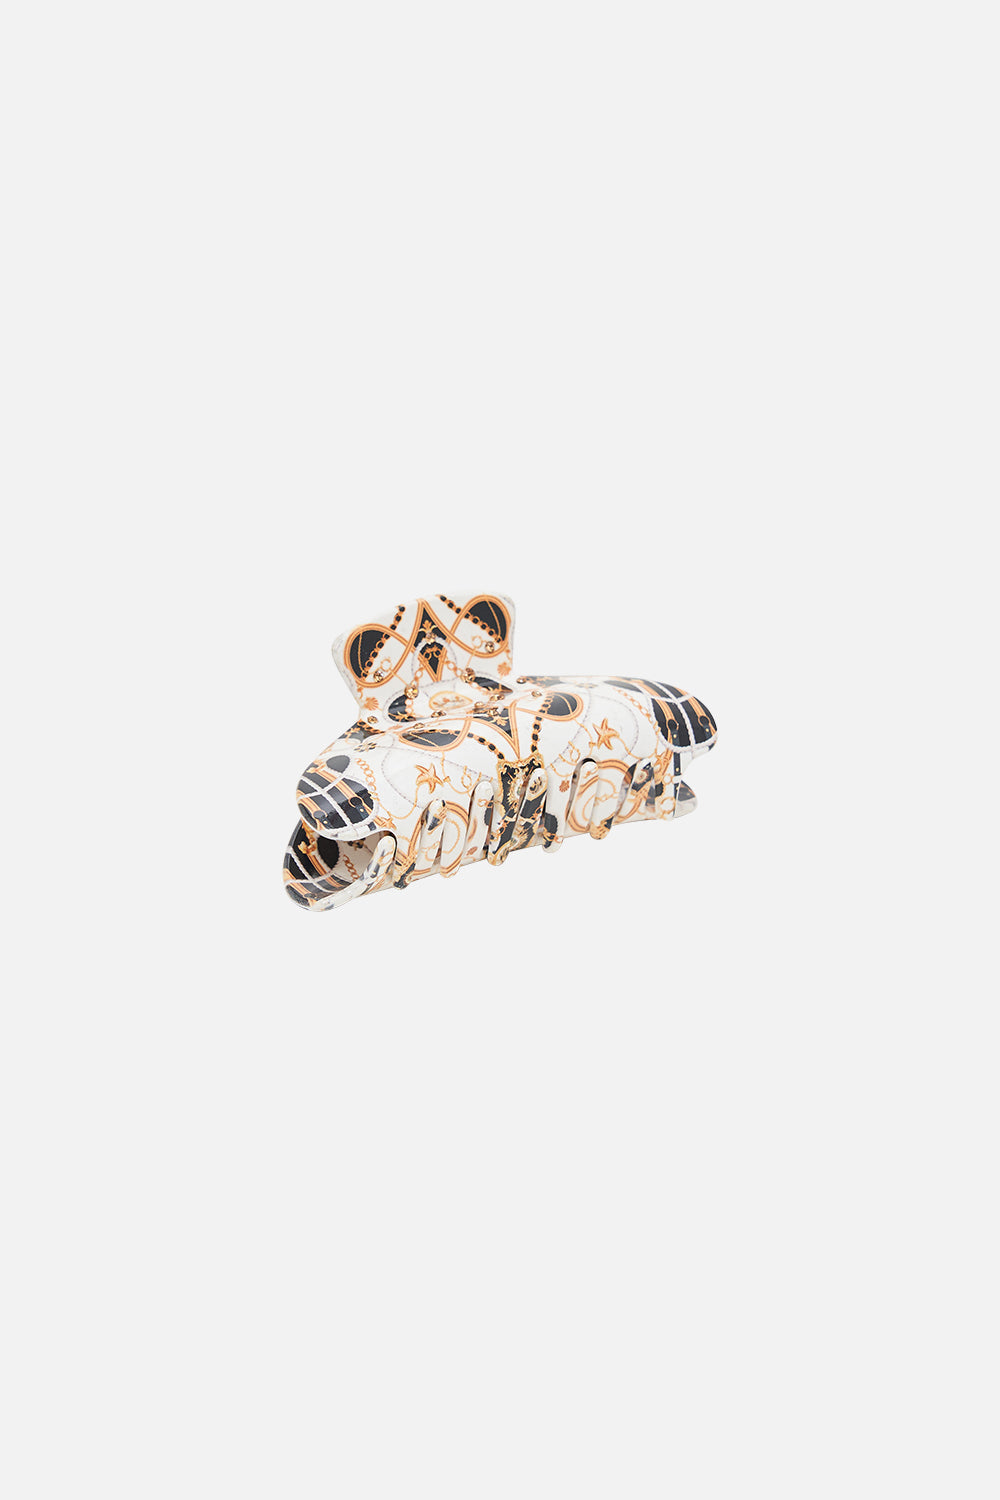 Product view of CAMILLA deisgner hair clasp in Sea Charm print